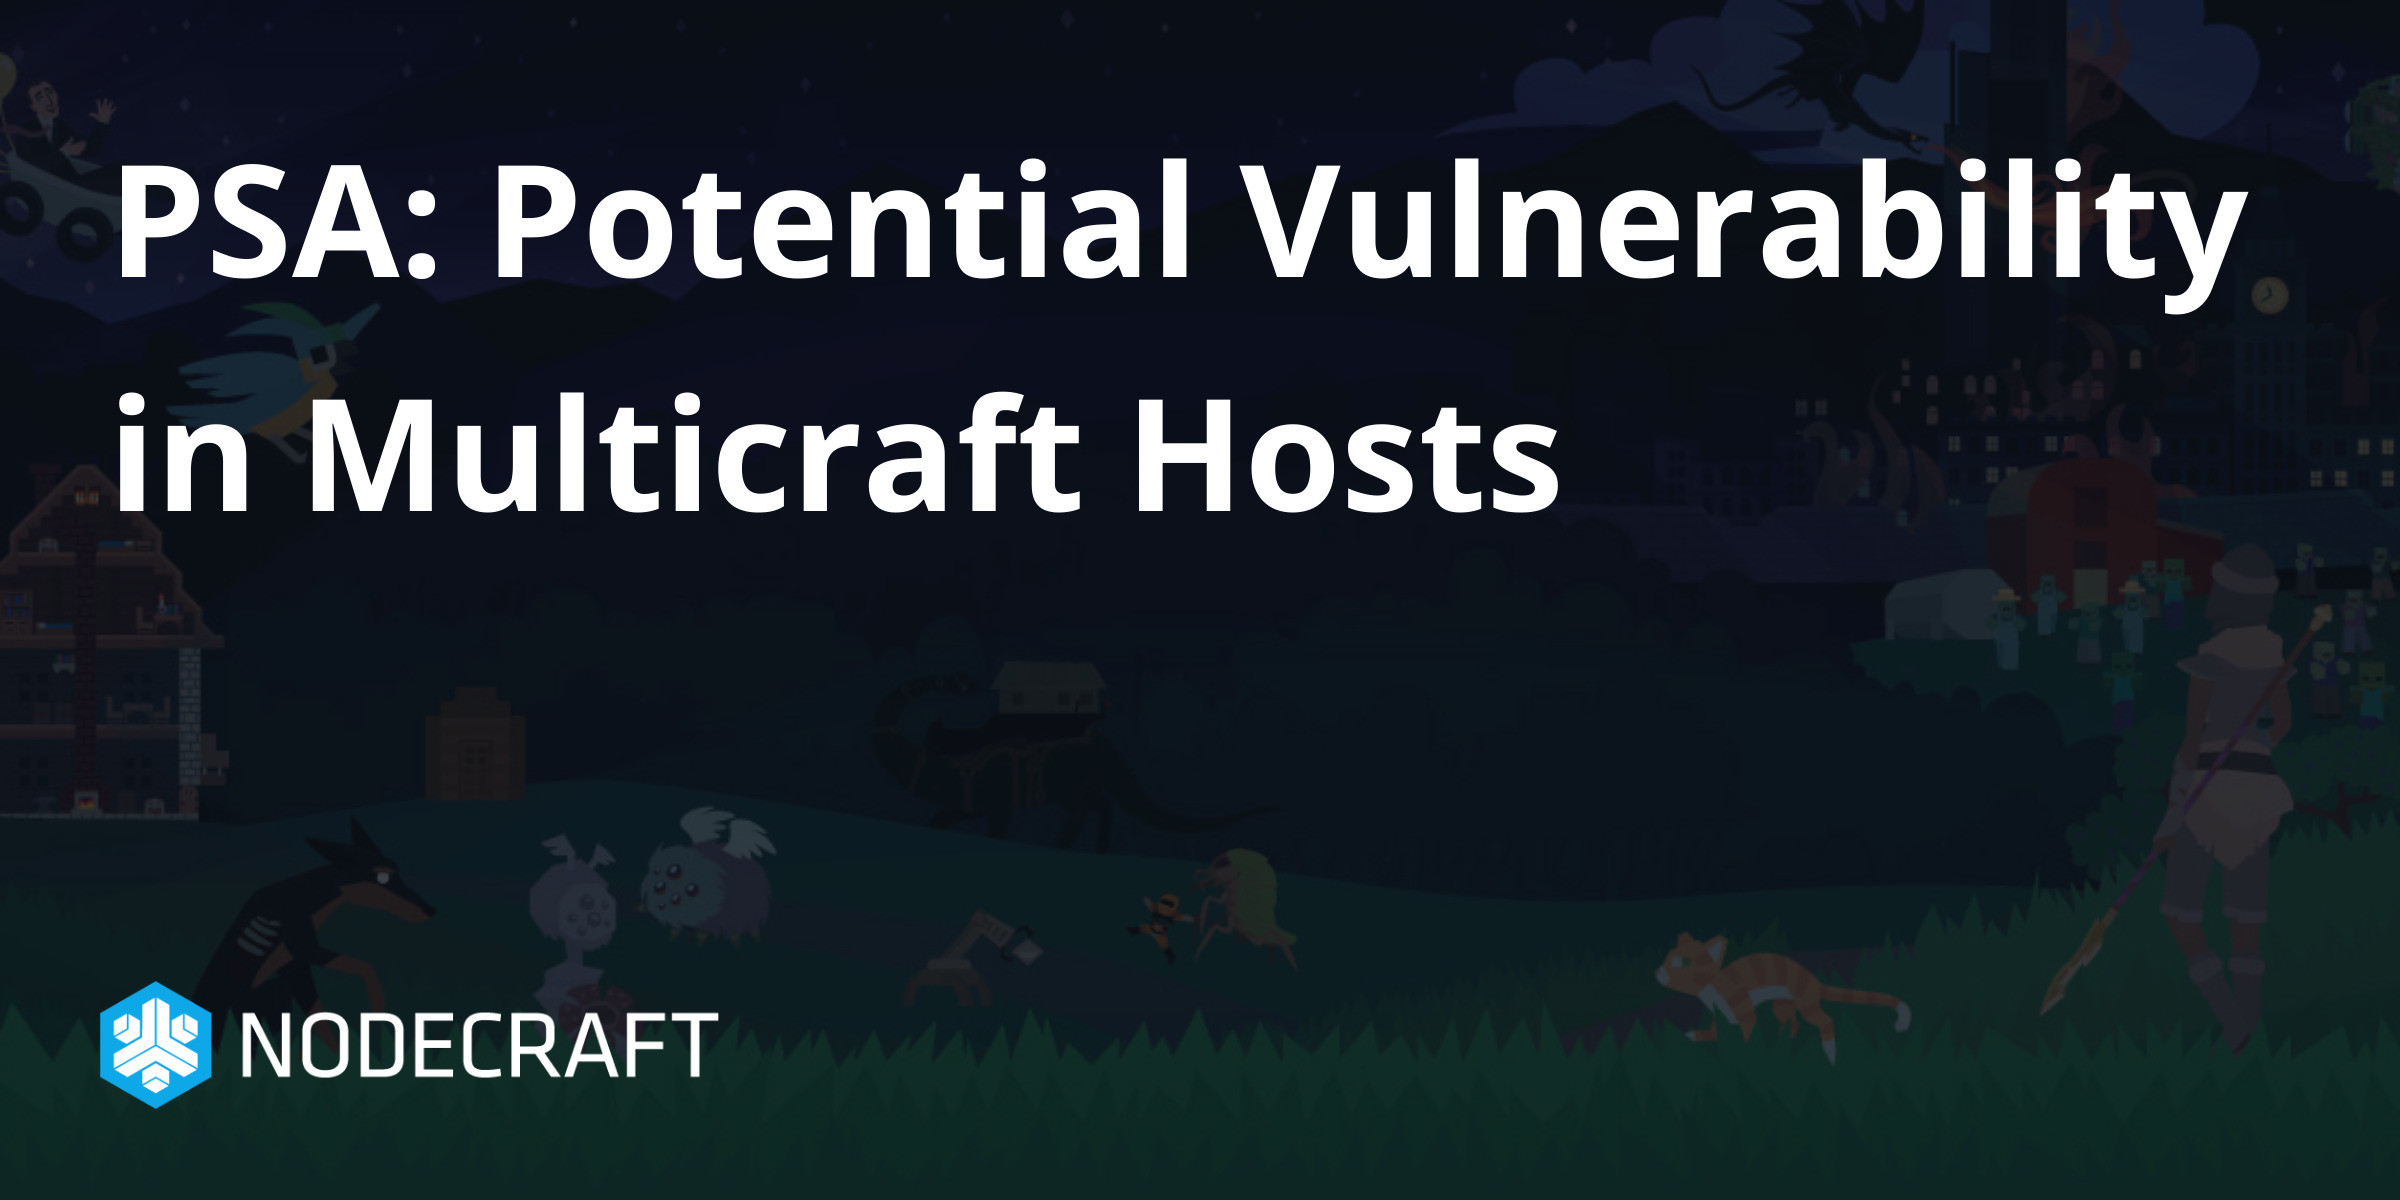 PSA: Potential Vulnerability in Multicraft Hosts